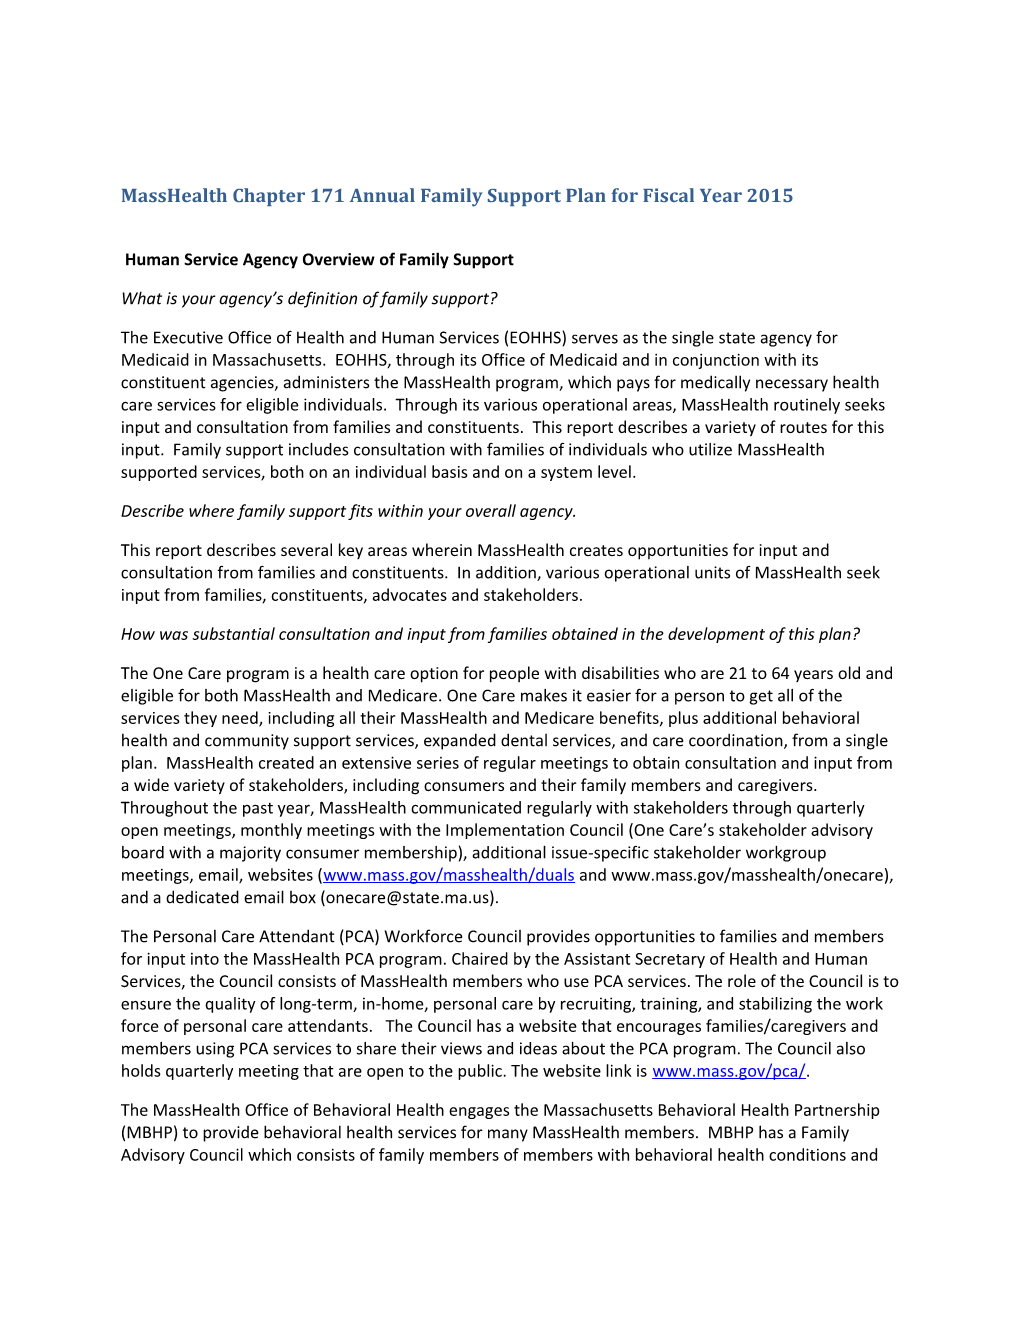 Masshealth Chapter 171 Annual Family Support Plan for Fiscal Year 2015